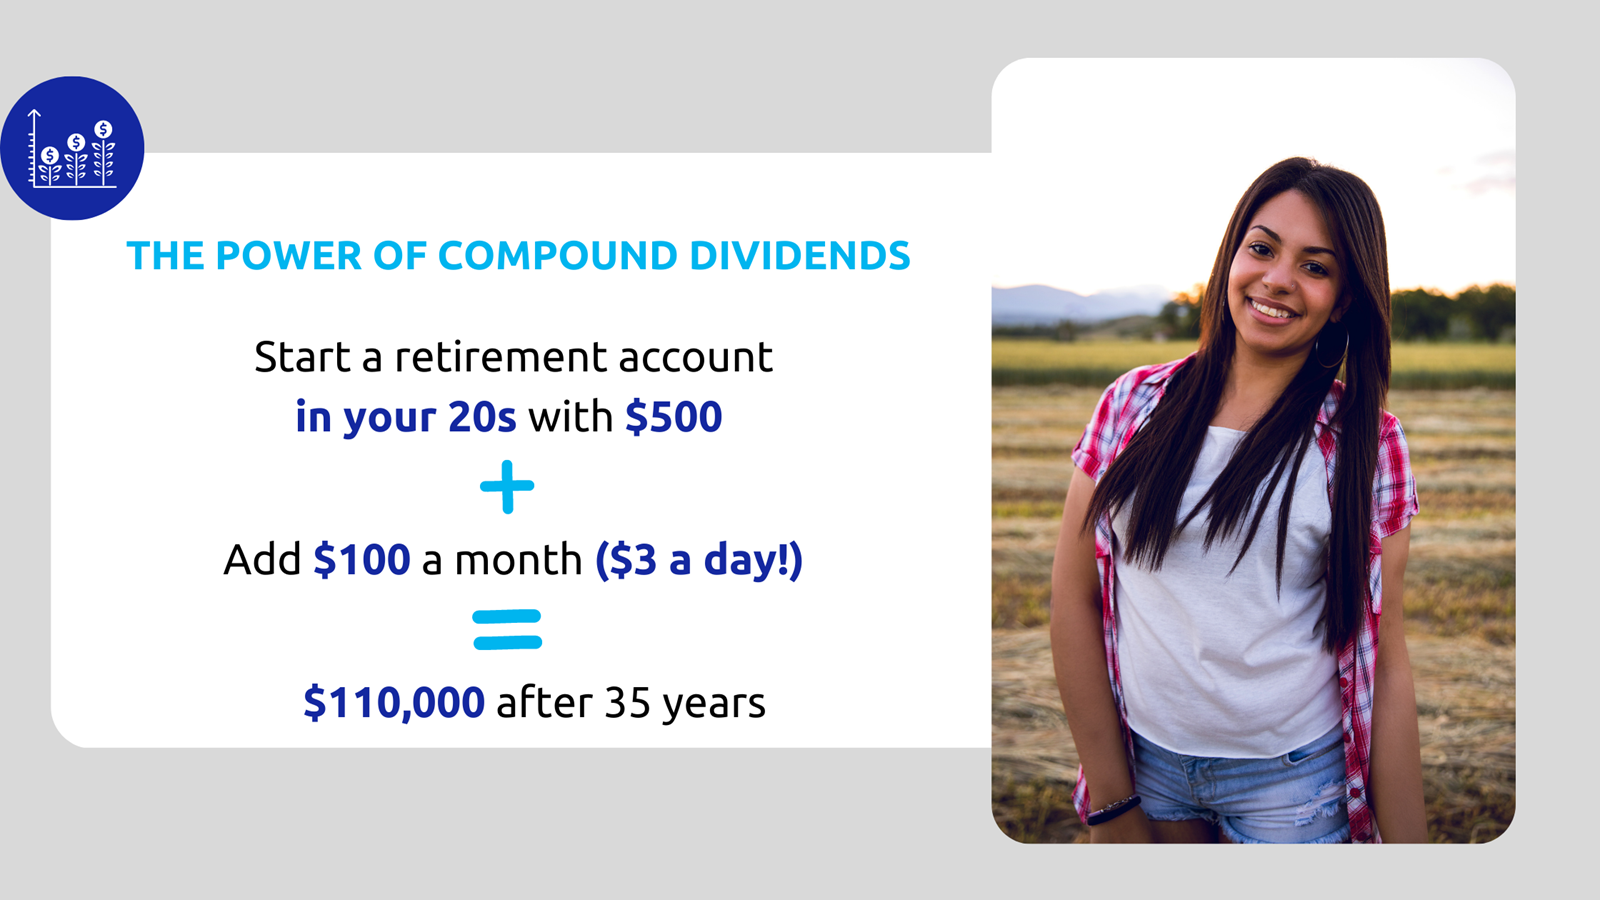 compound dividends example when you invest $500 in your twenties